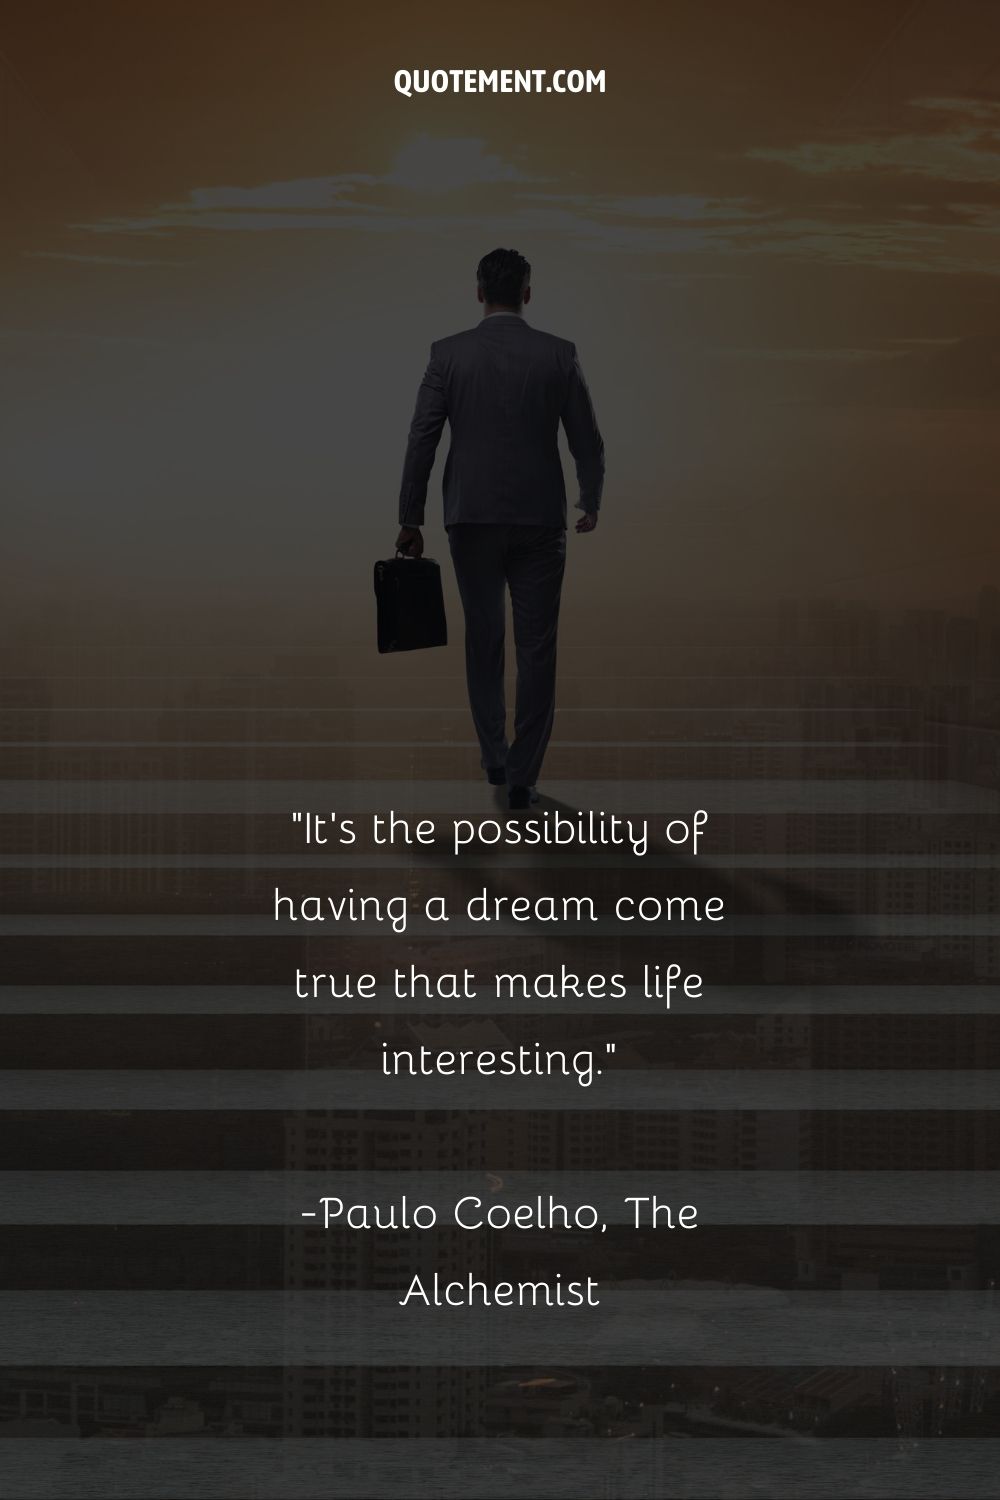 It's the possibility of having a dream come true that makes life interesting.